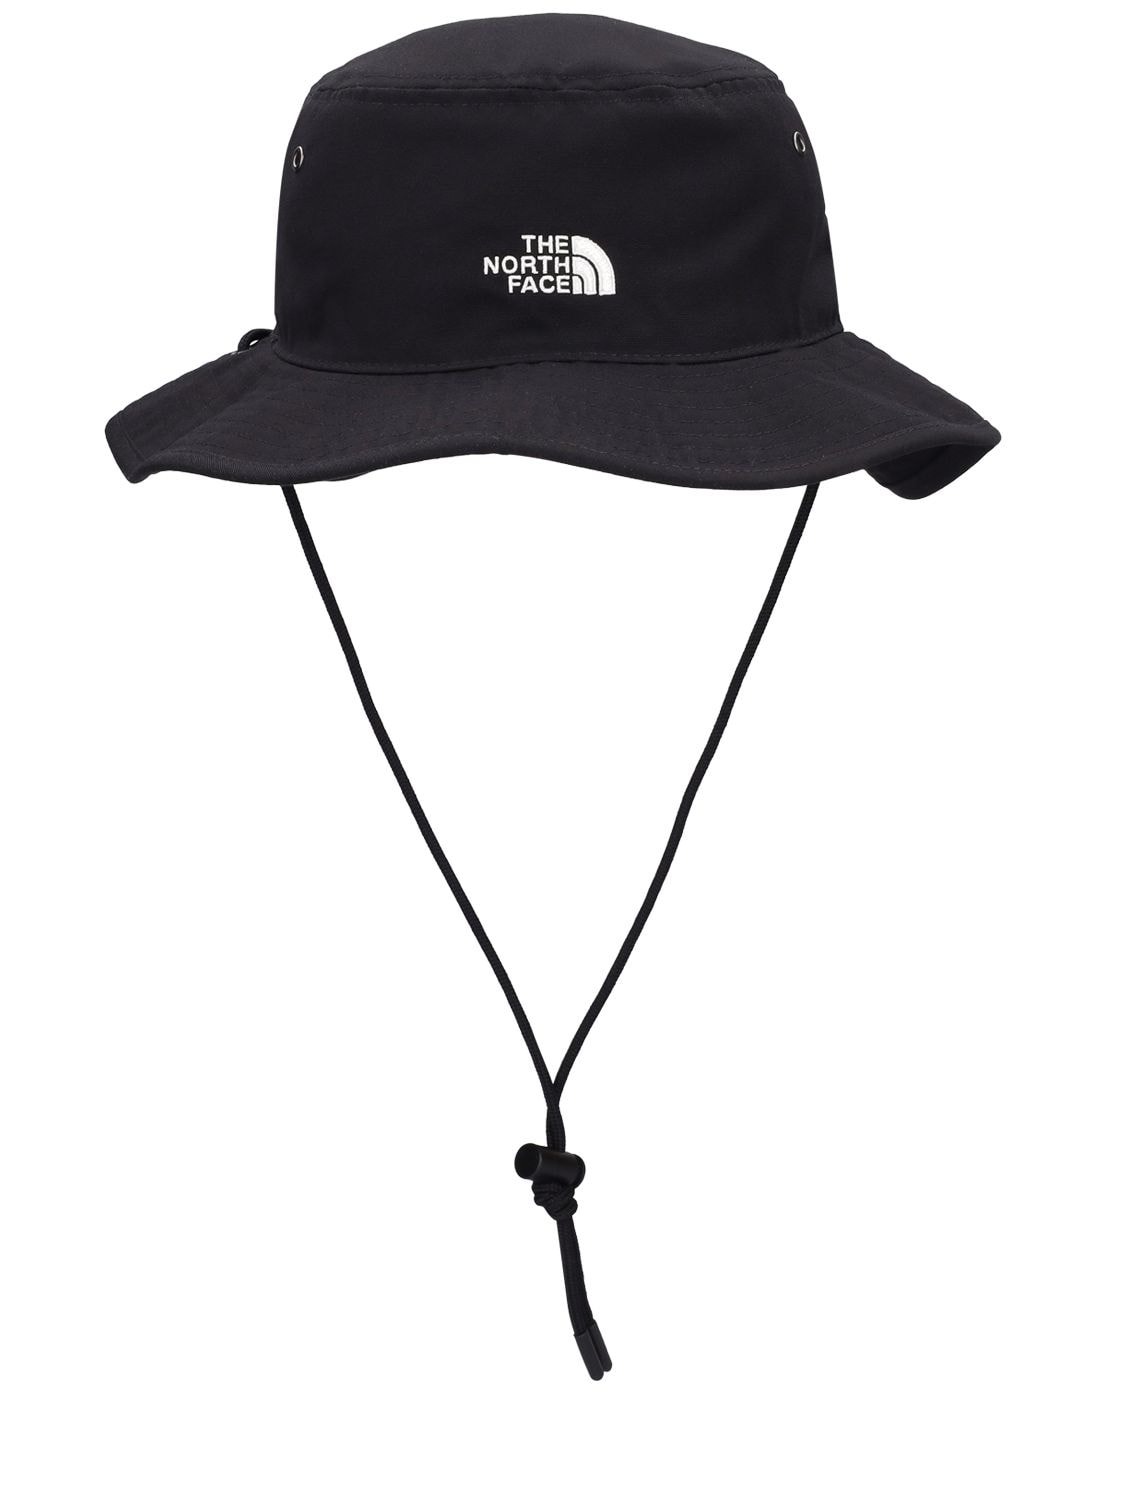 THE NORTH FACE RECYCLED 66 BRIMMER HAT